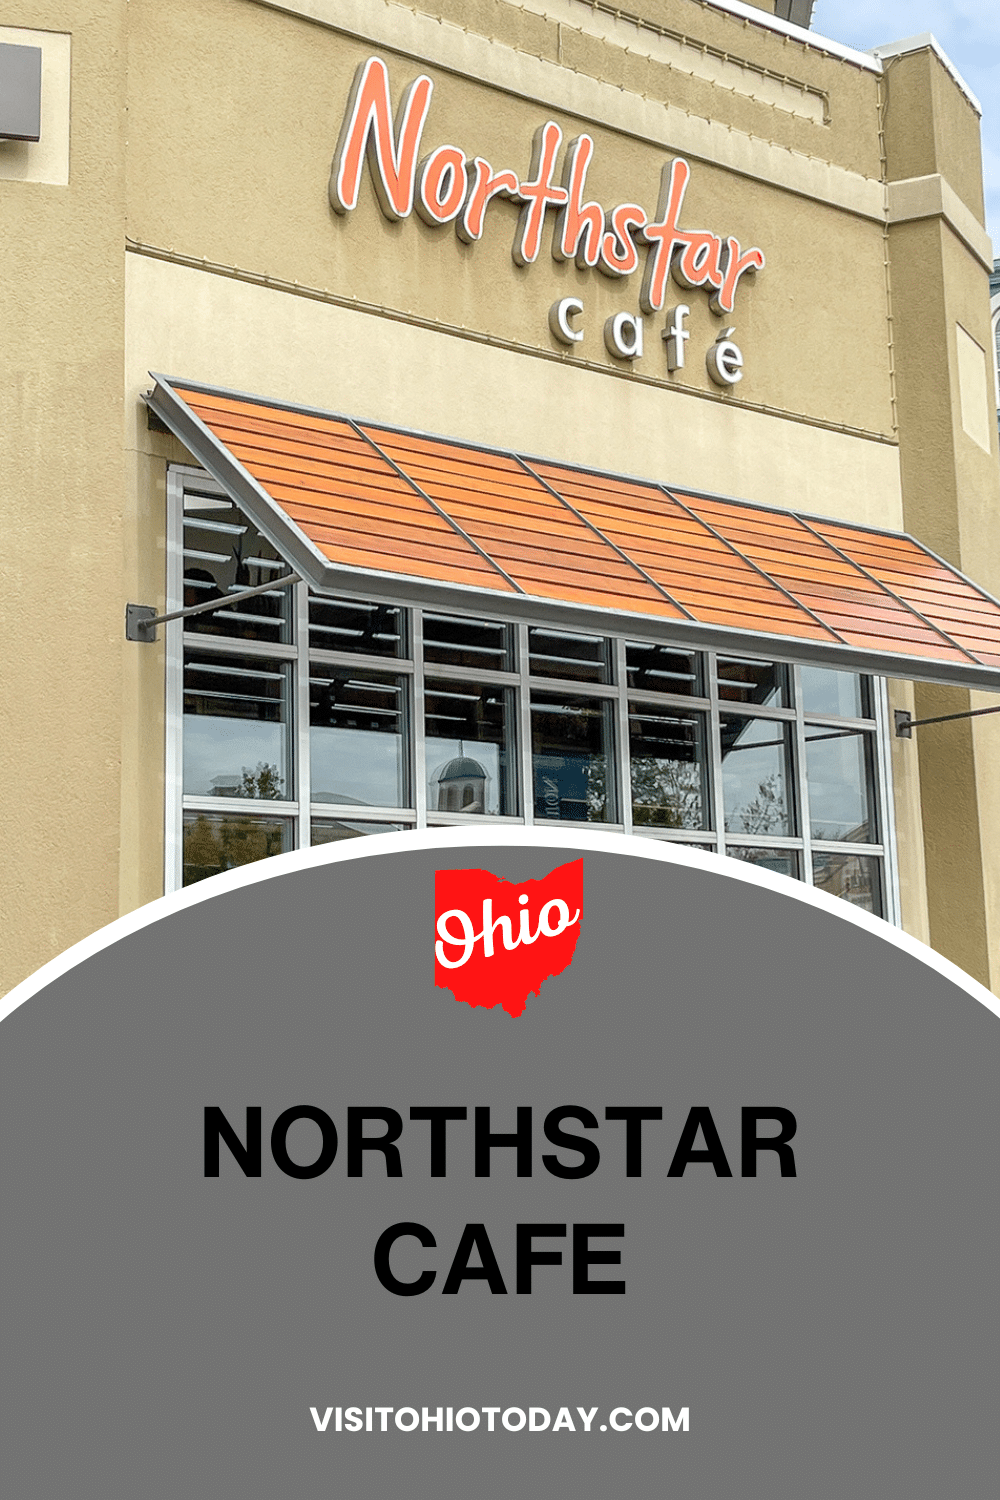 Northstar Cafe is a family owned and operated restaurant that was established in 2004 and currently has four locations in the Columbus region, one in the Cincinnati region, and one in the Cleveland region.